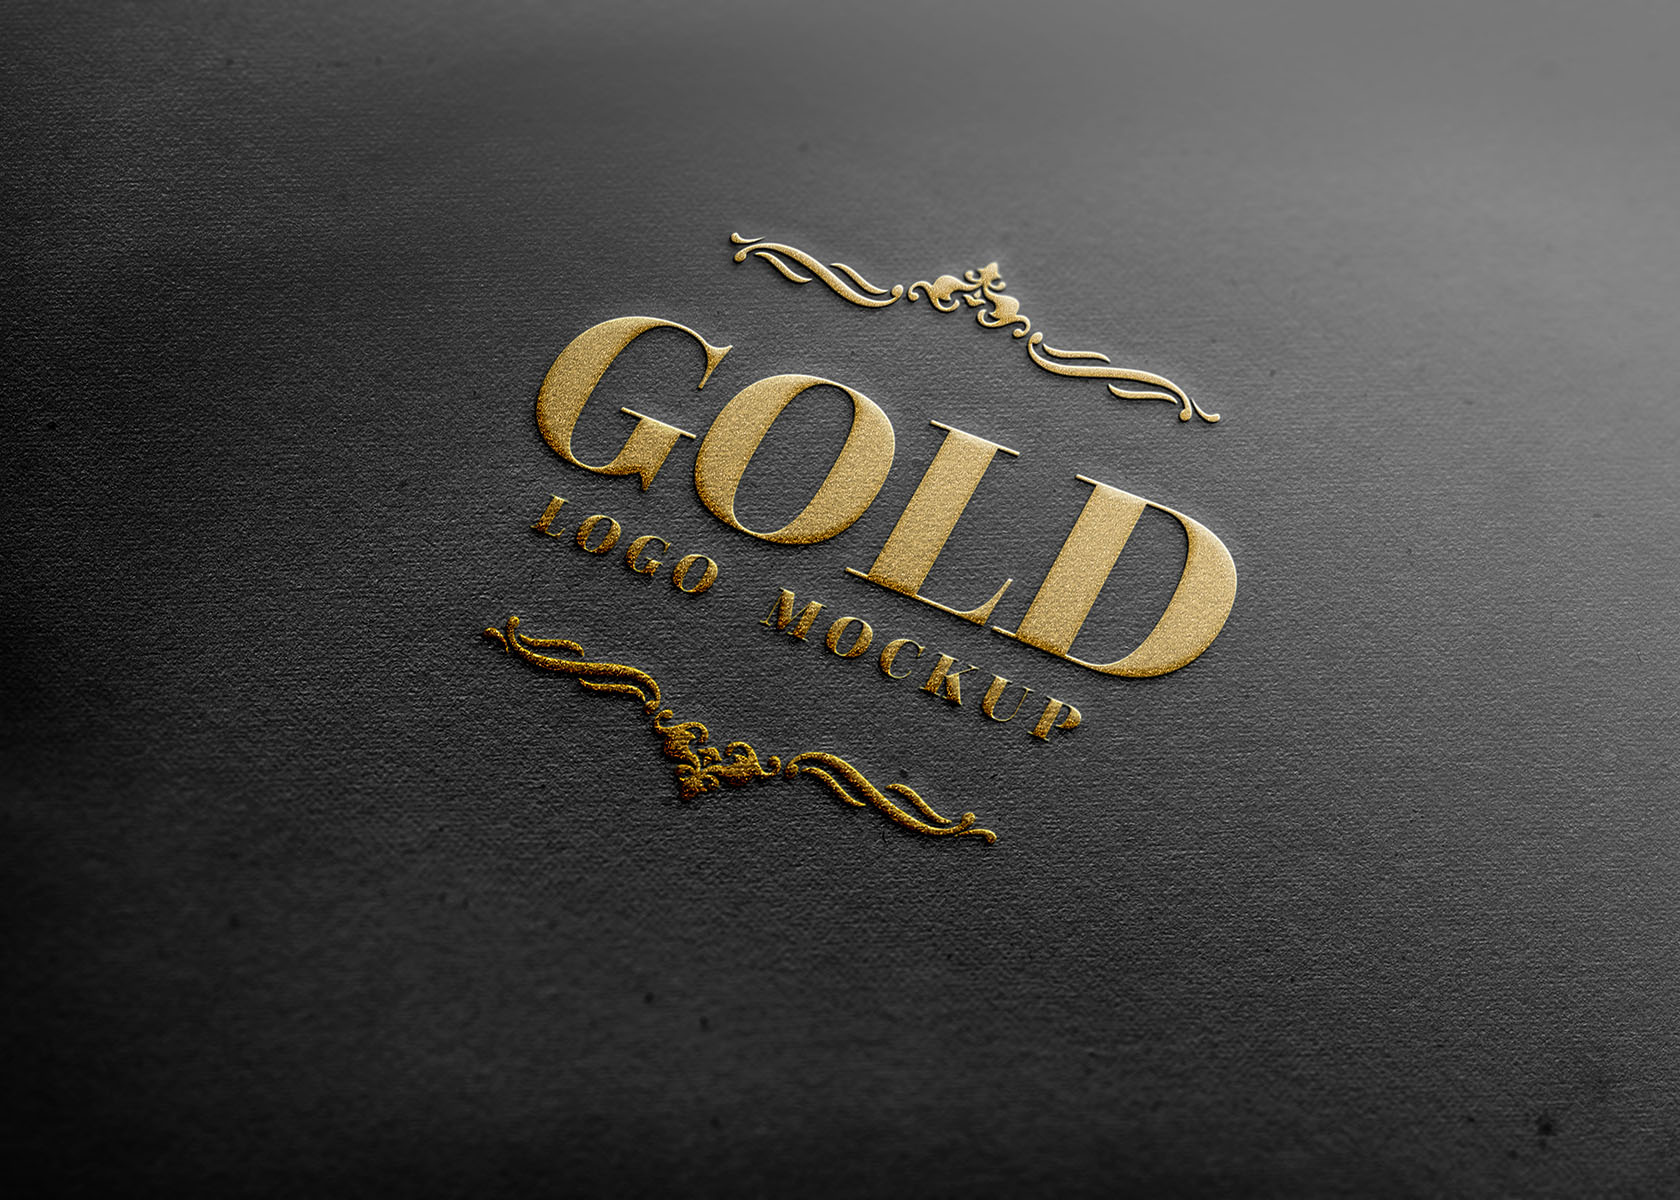 Embossed Gold And Silver Foil Logo Mockup